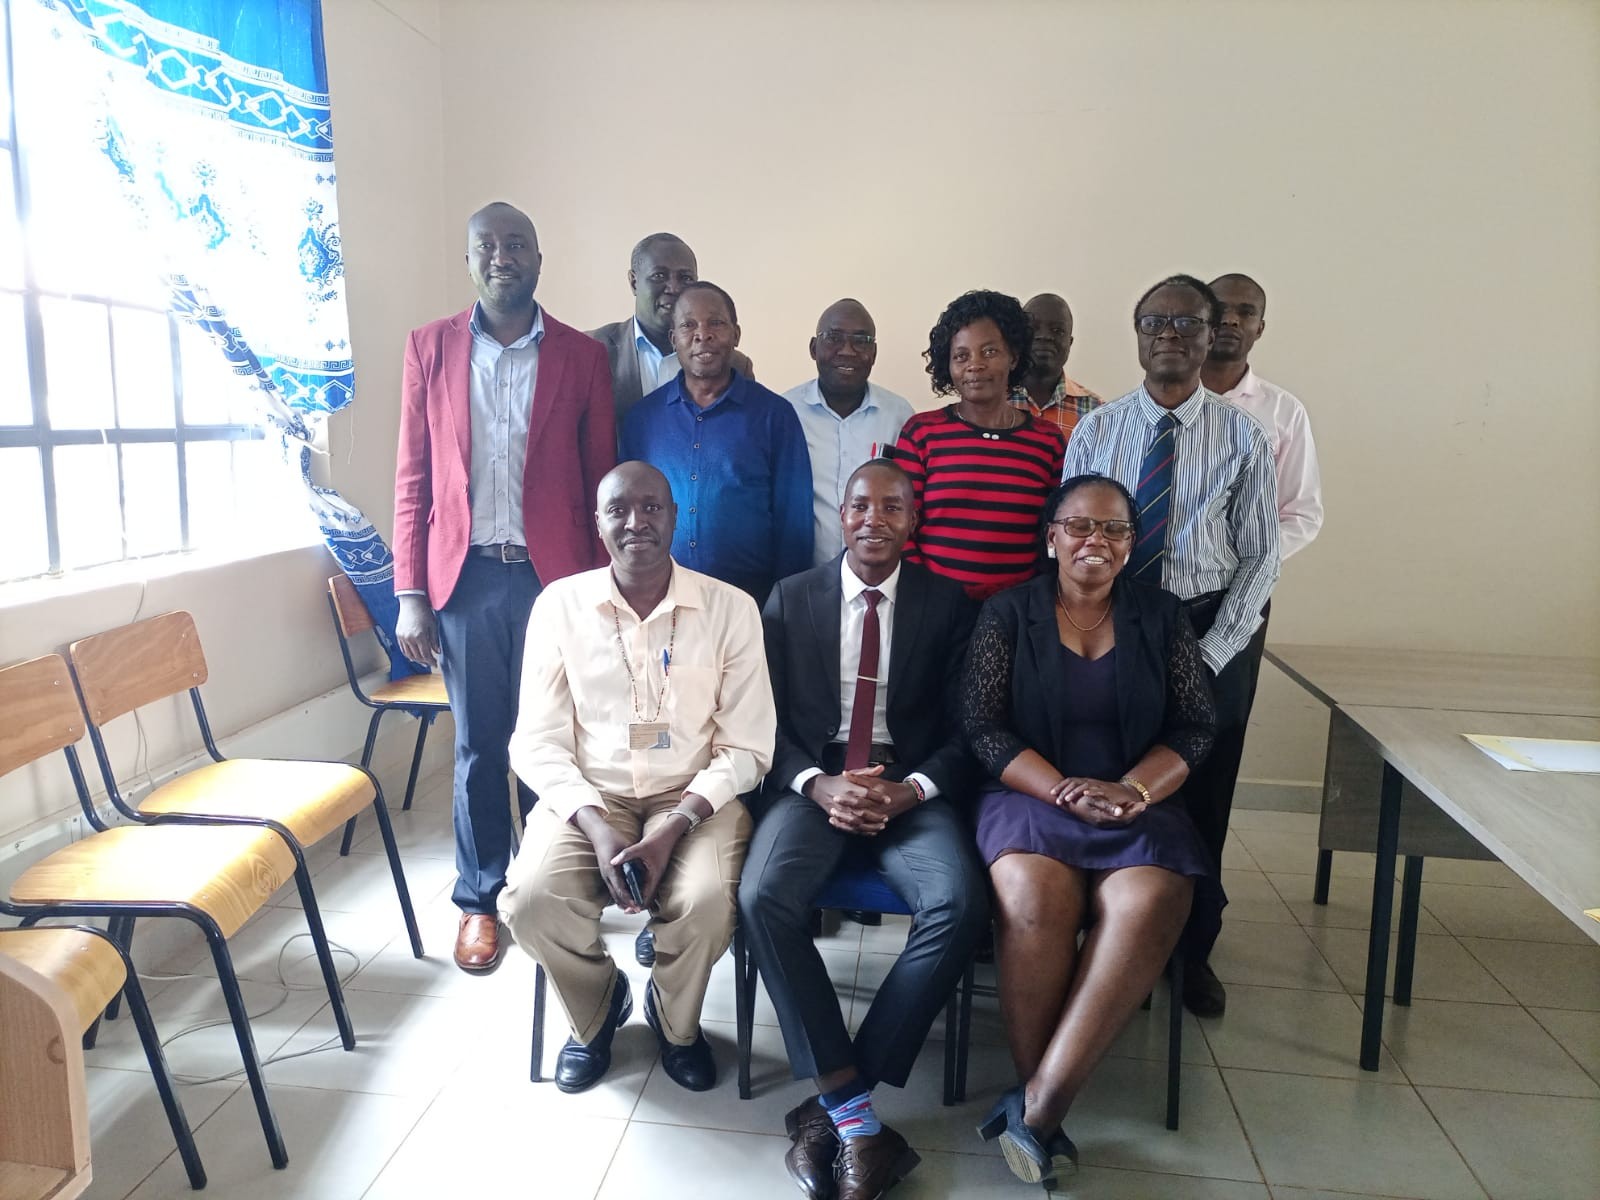 OYILE PAUL ODUOR’S MASTERS ORAL DEFENSE